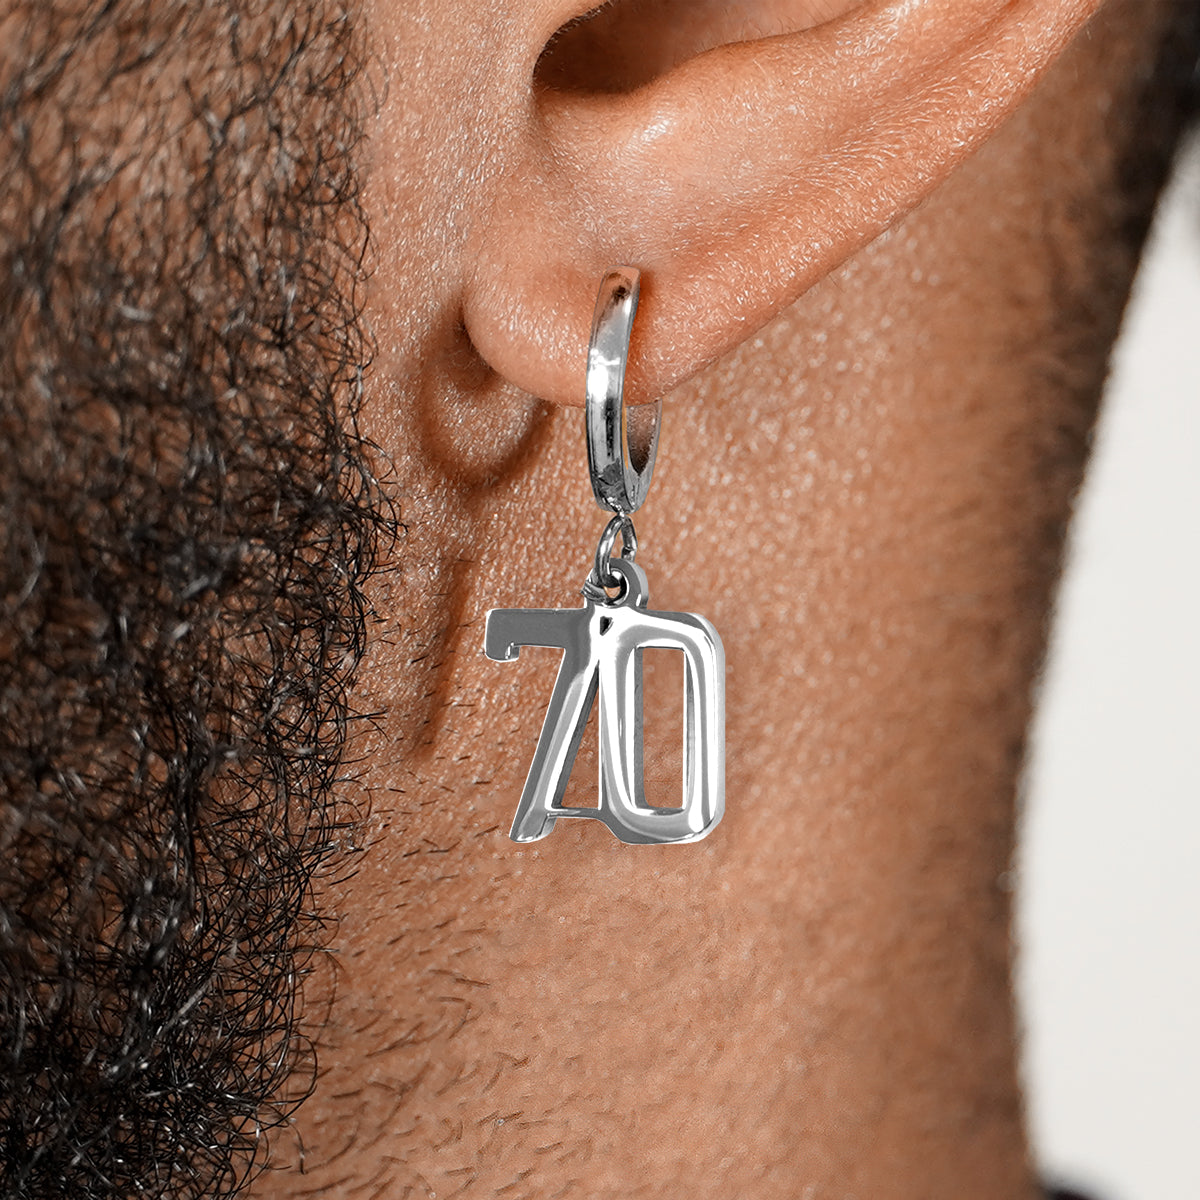 70 Number Earring - Stainless Steel